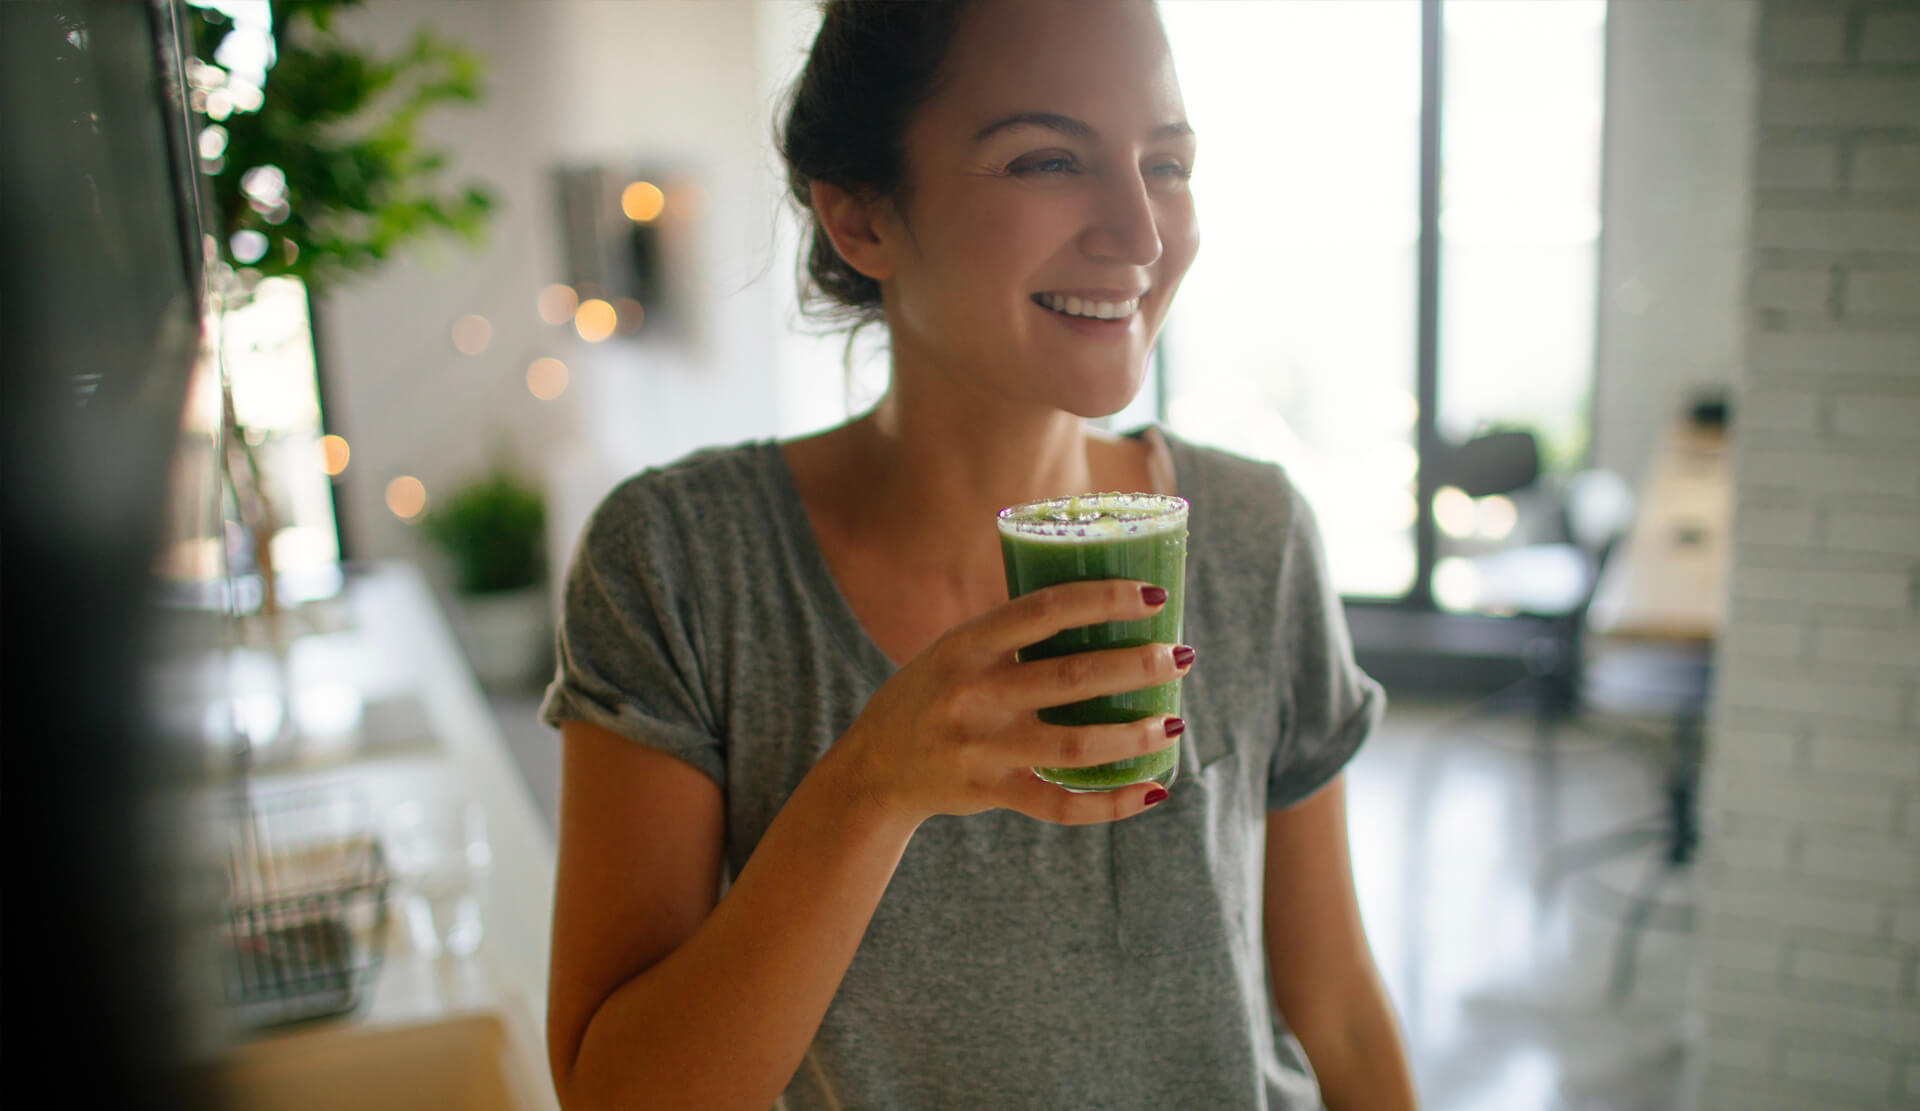 Many-Hats-Nutridense-branding-woman-smoothie